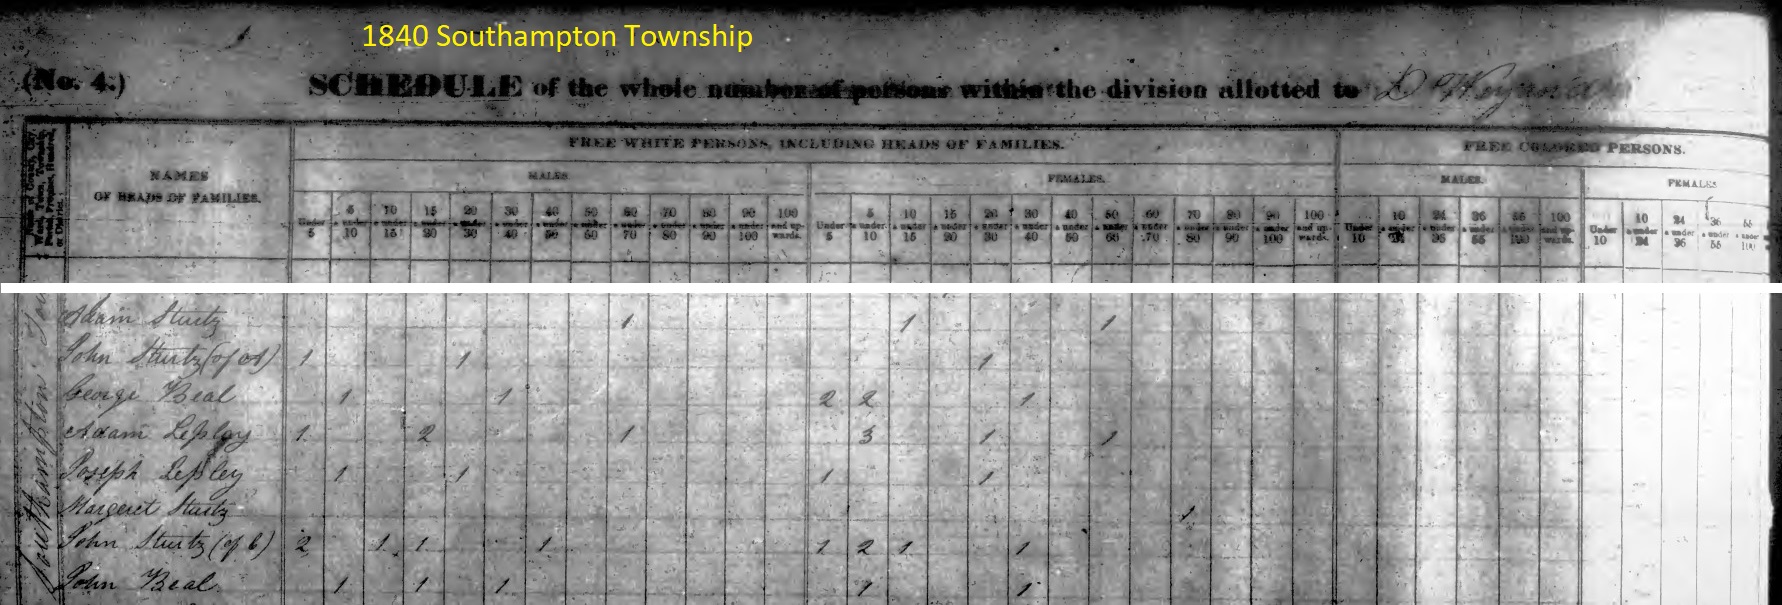 Adam and Joseph Lepley in the 1840 census of Southampton Township, Somerset County.